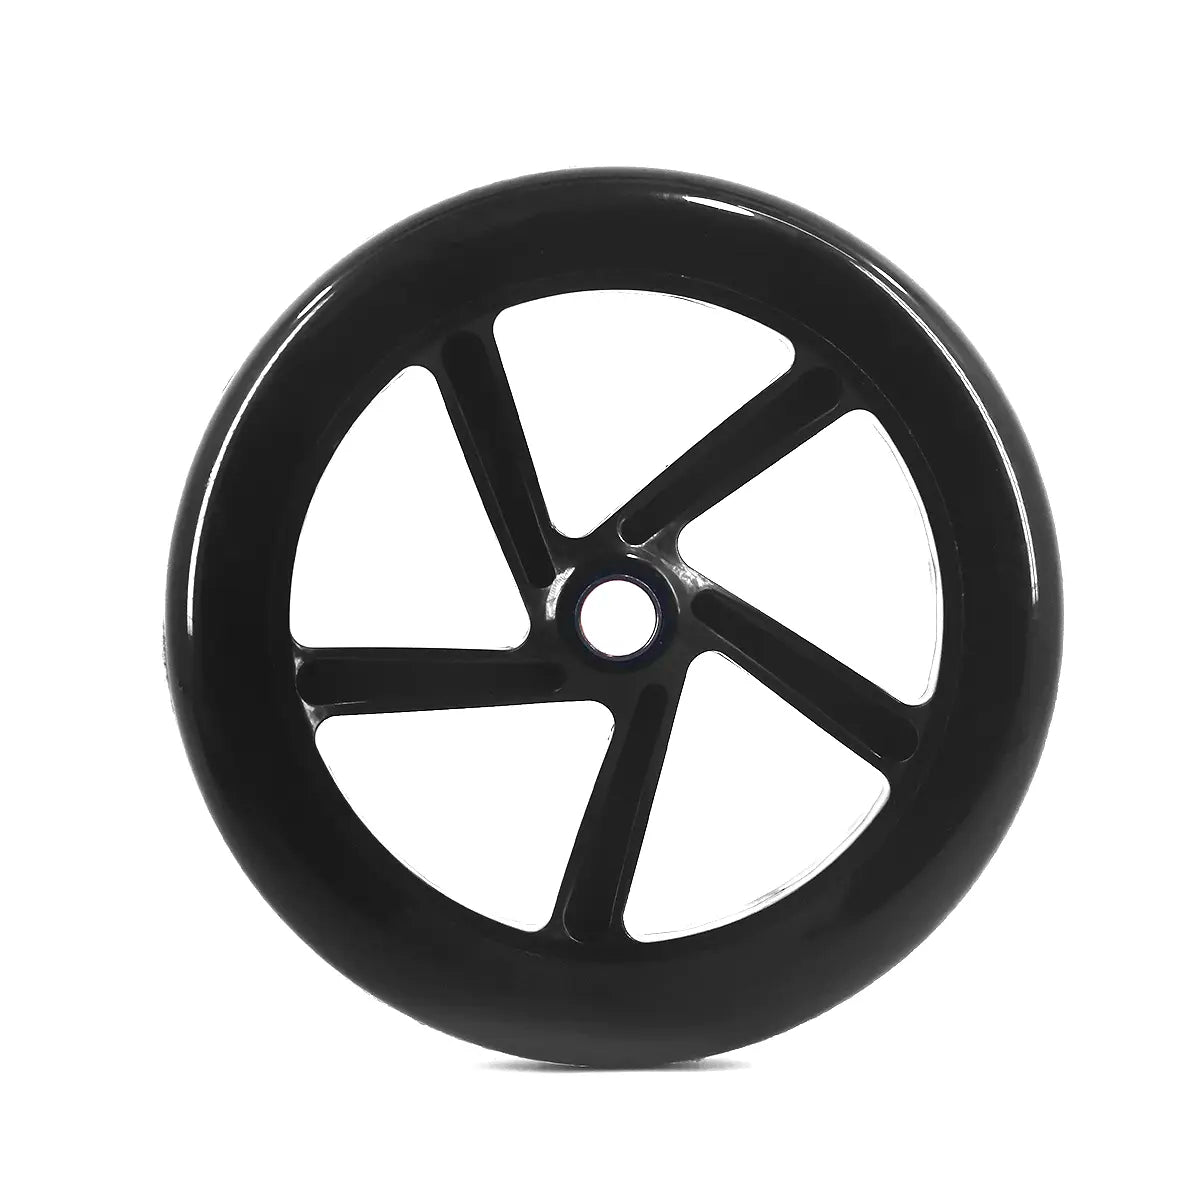 Scooter Wheel 180mm 85a Dyloks Pair